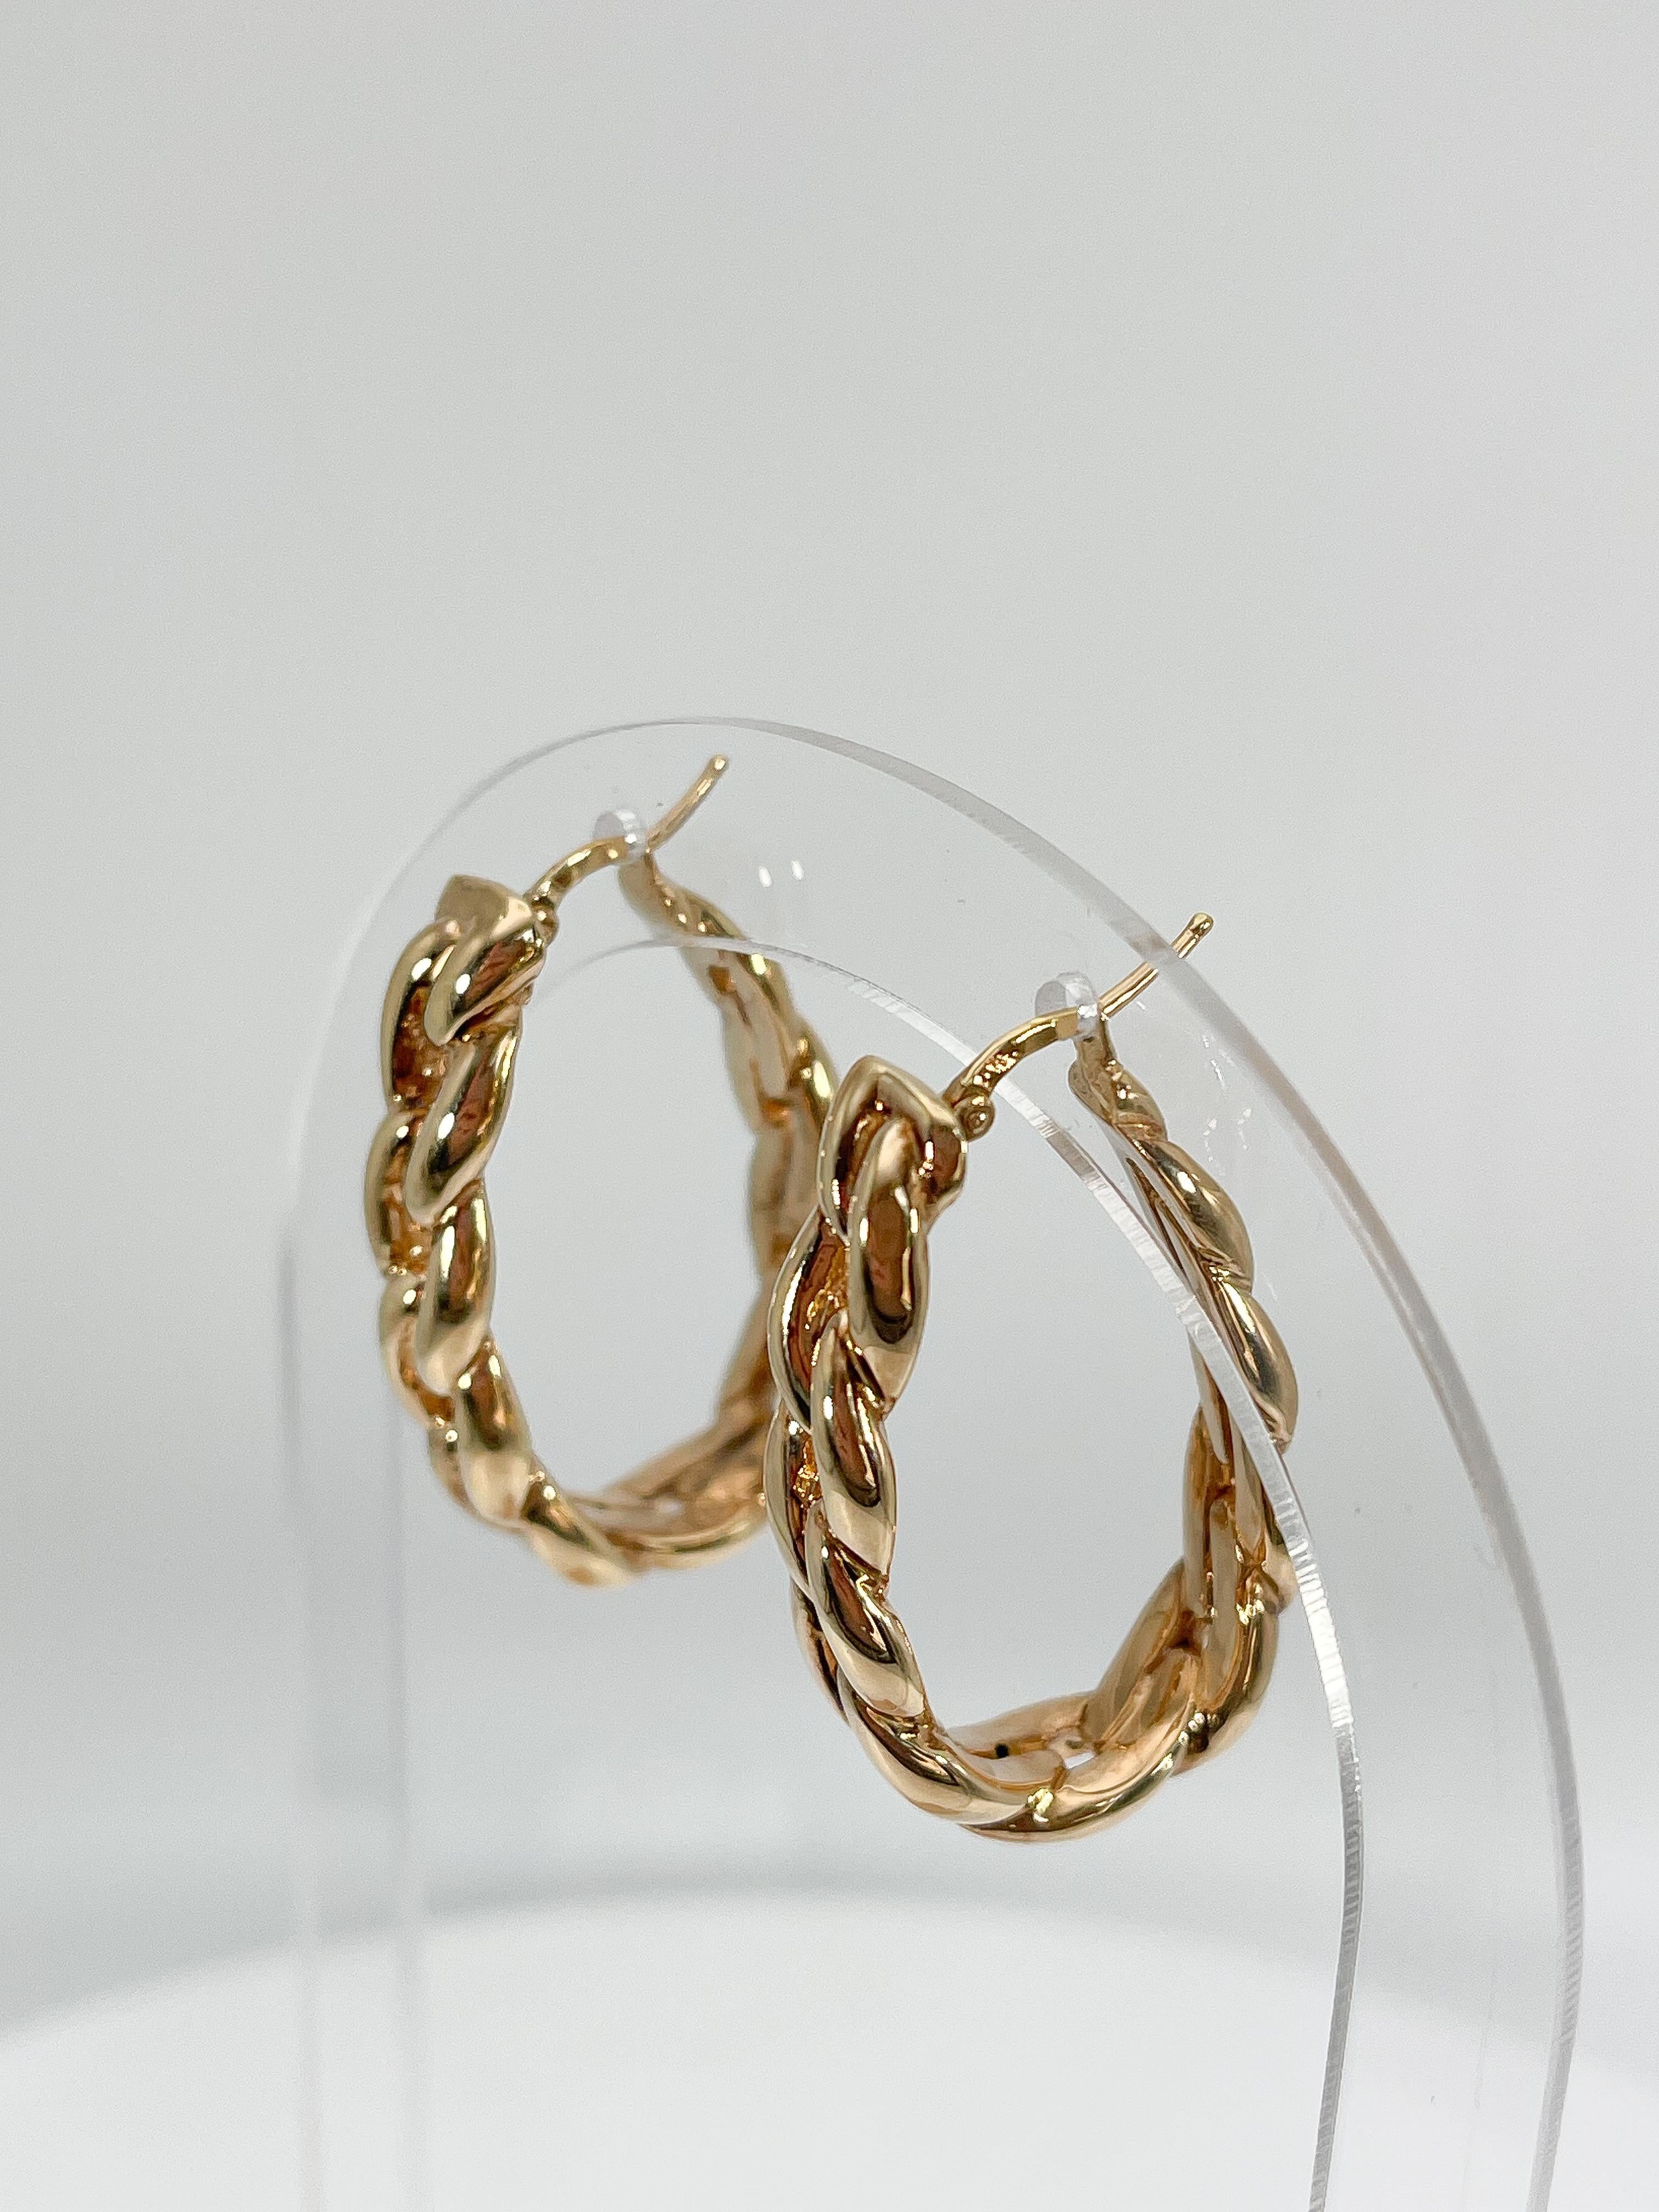 14K Yellow Gold Thick Chain Hoop Earrings  In Excellent Condition For Sale In Stuart, FL